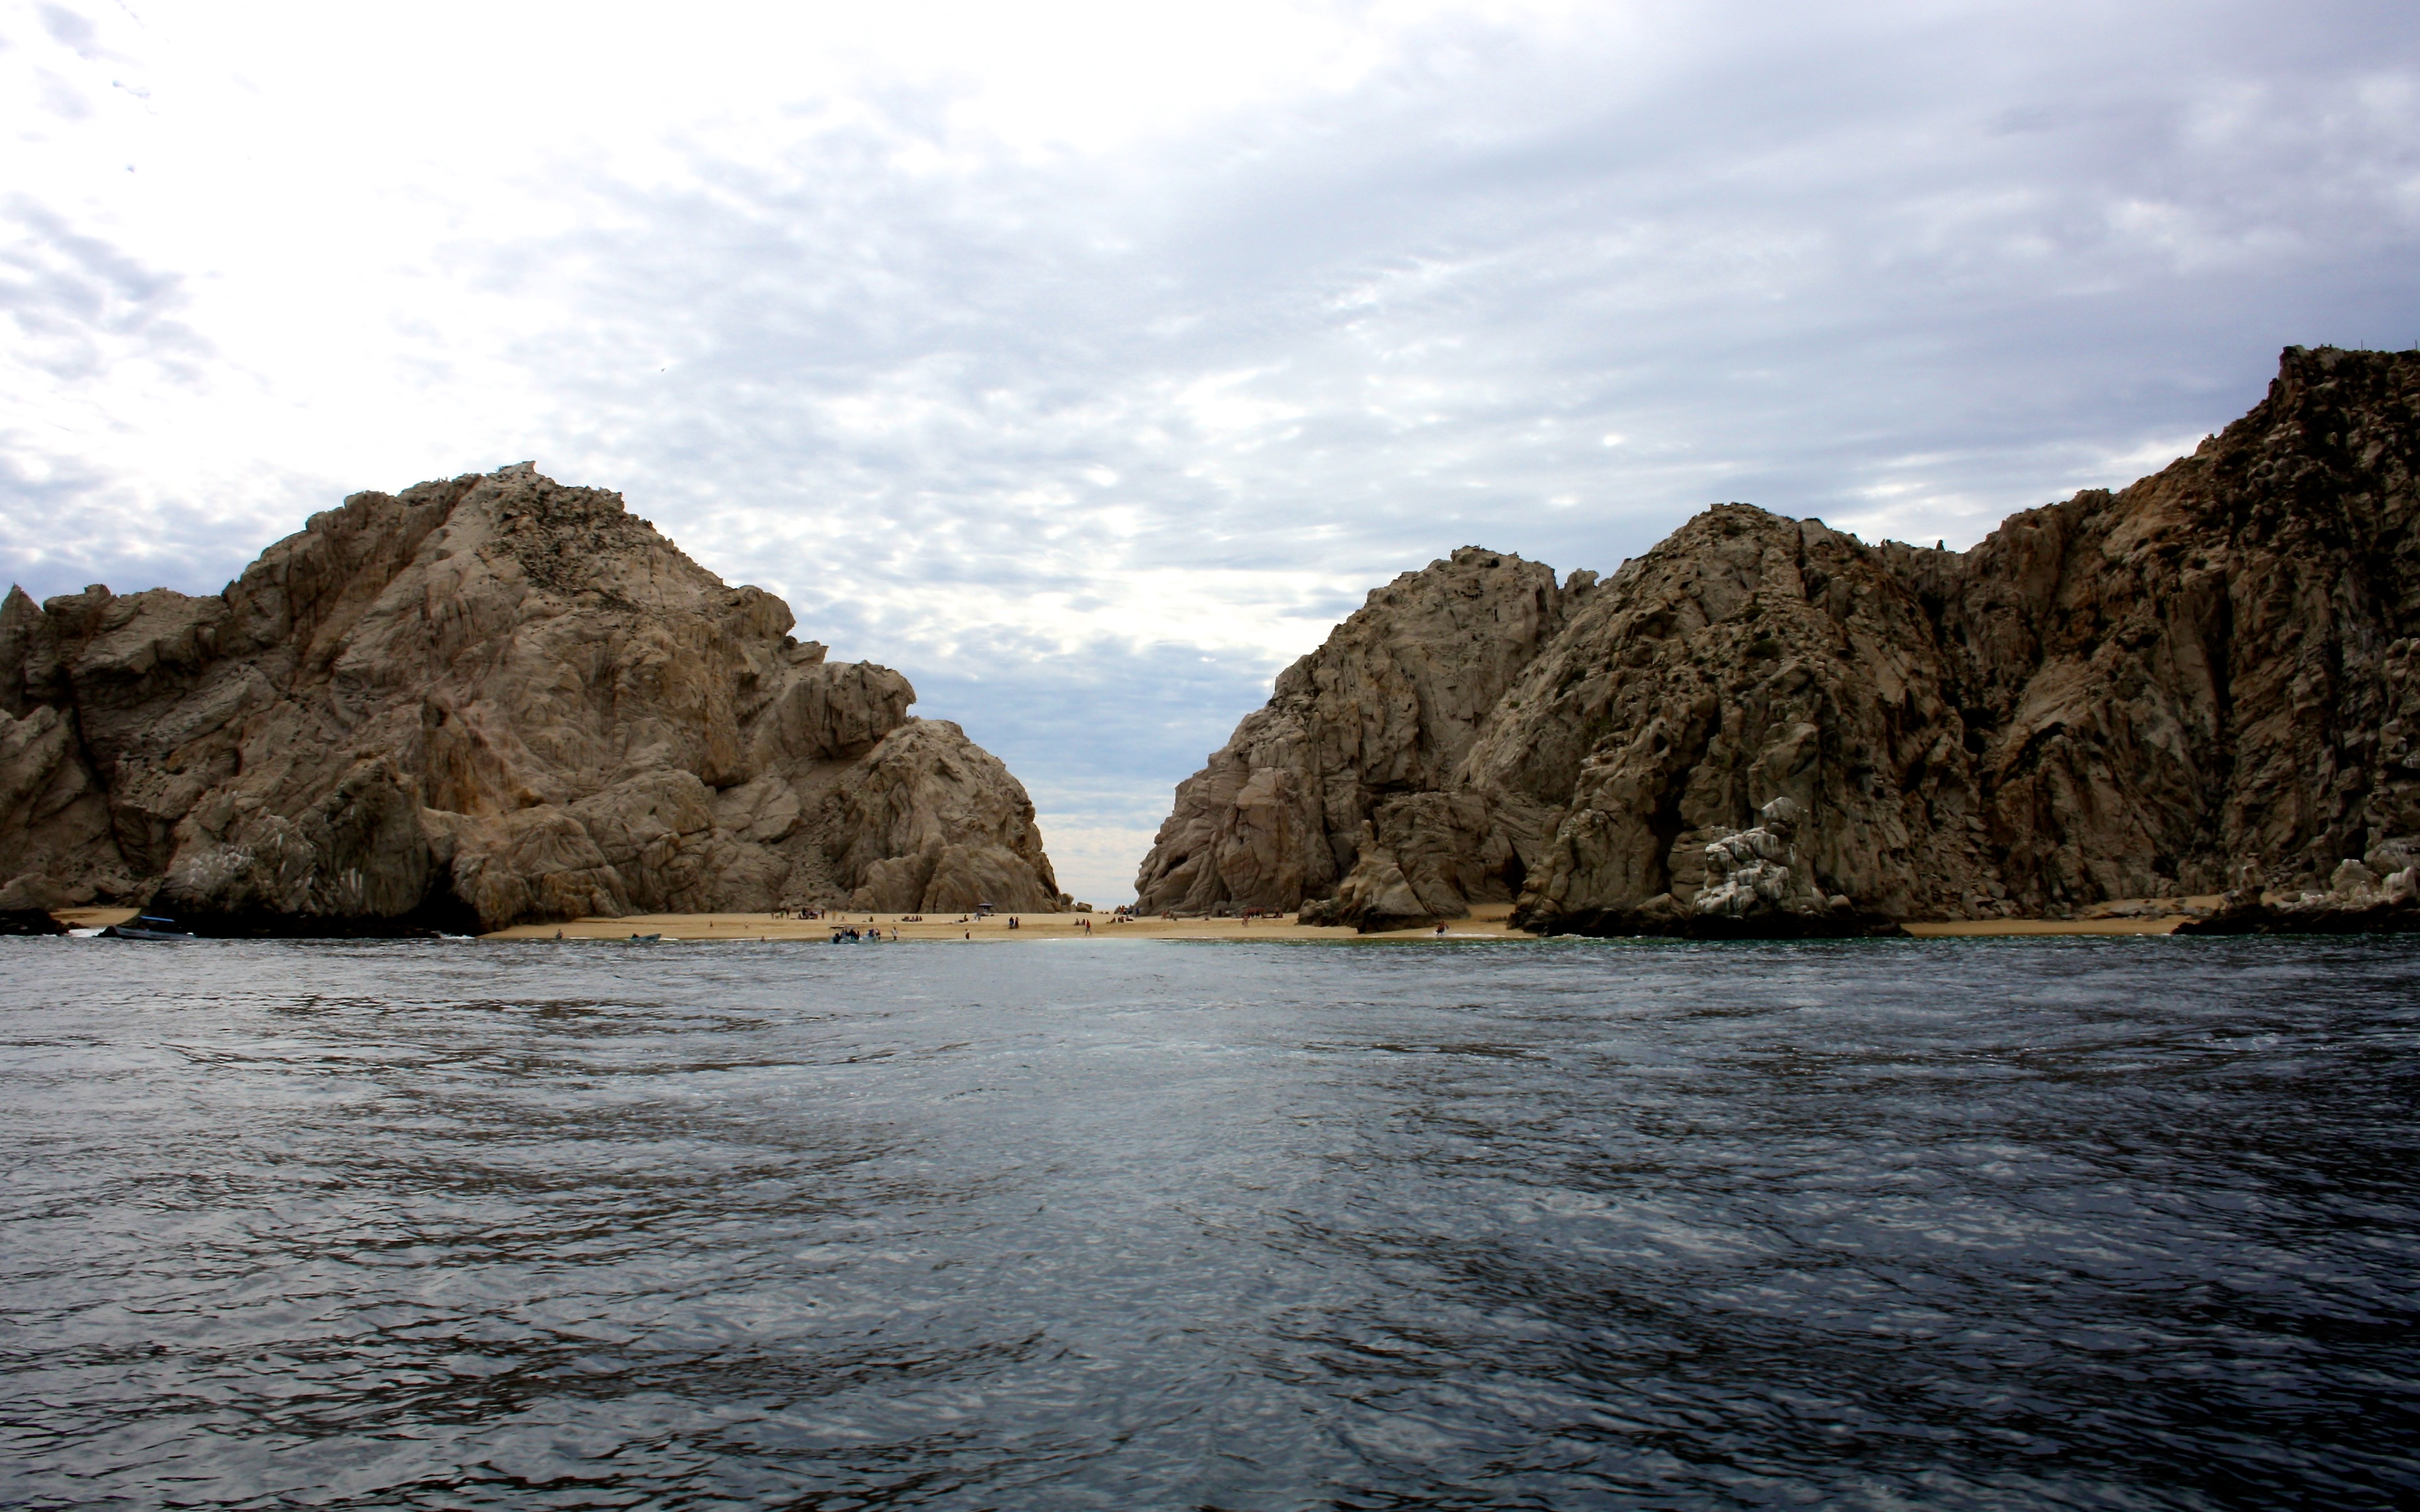 Lovers Beach desktop wallpaper showing stunning natural scenery in Cabo San Lucas, Mexico.